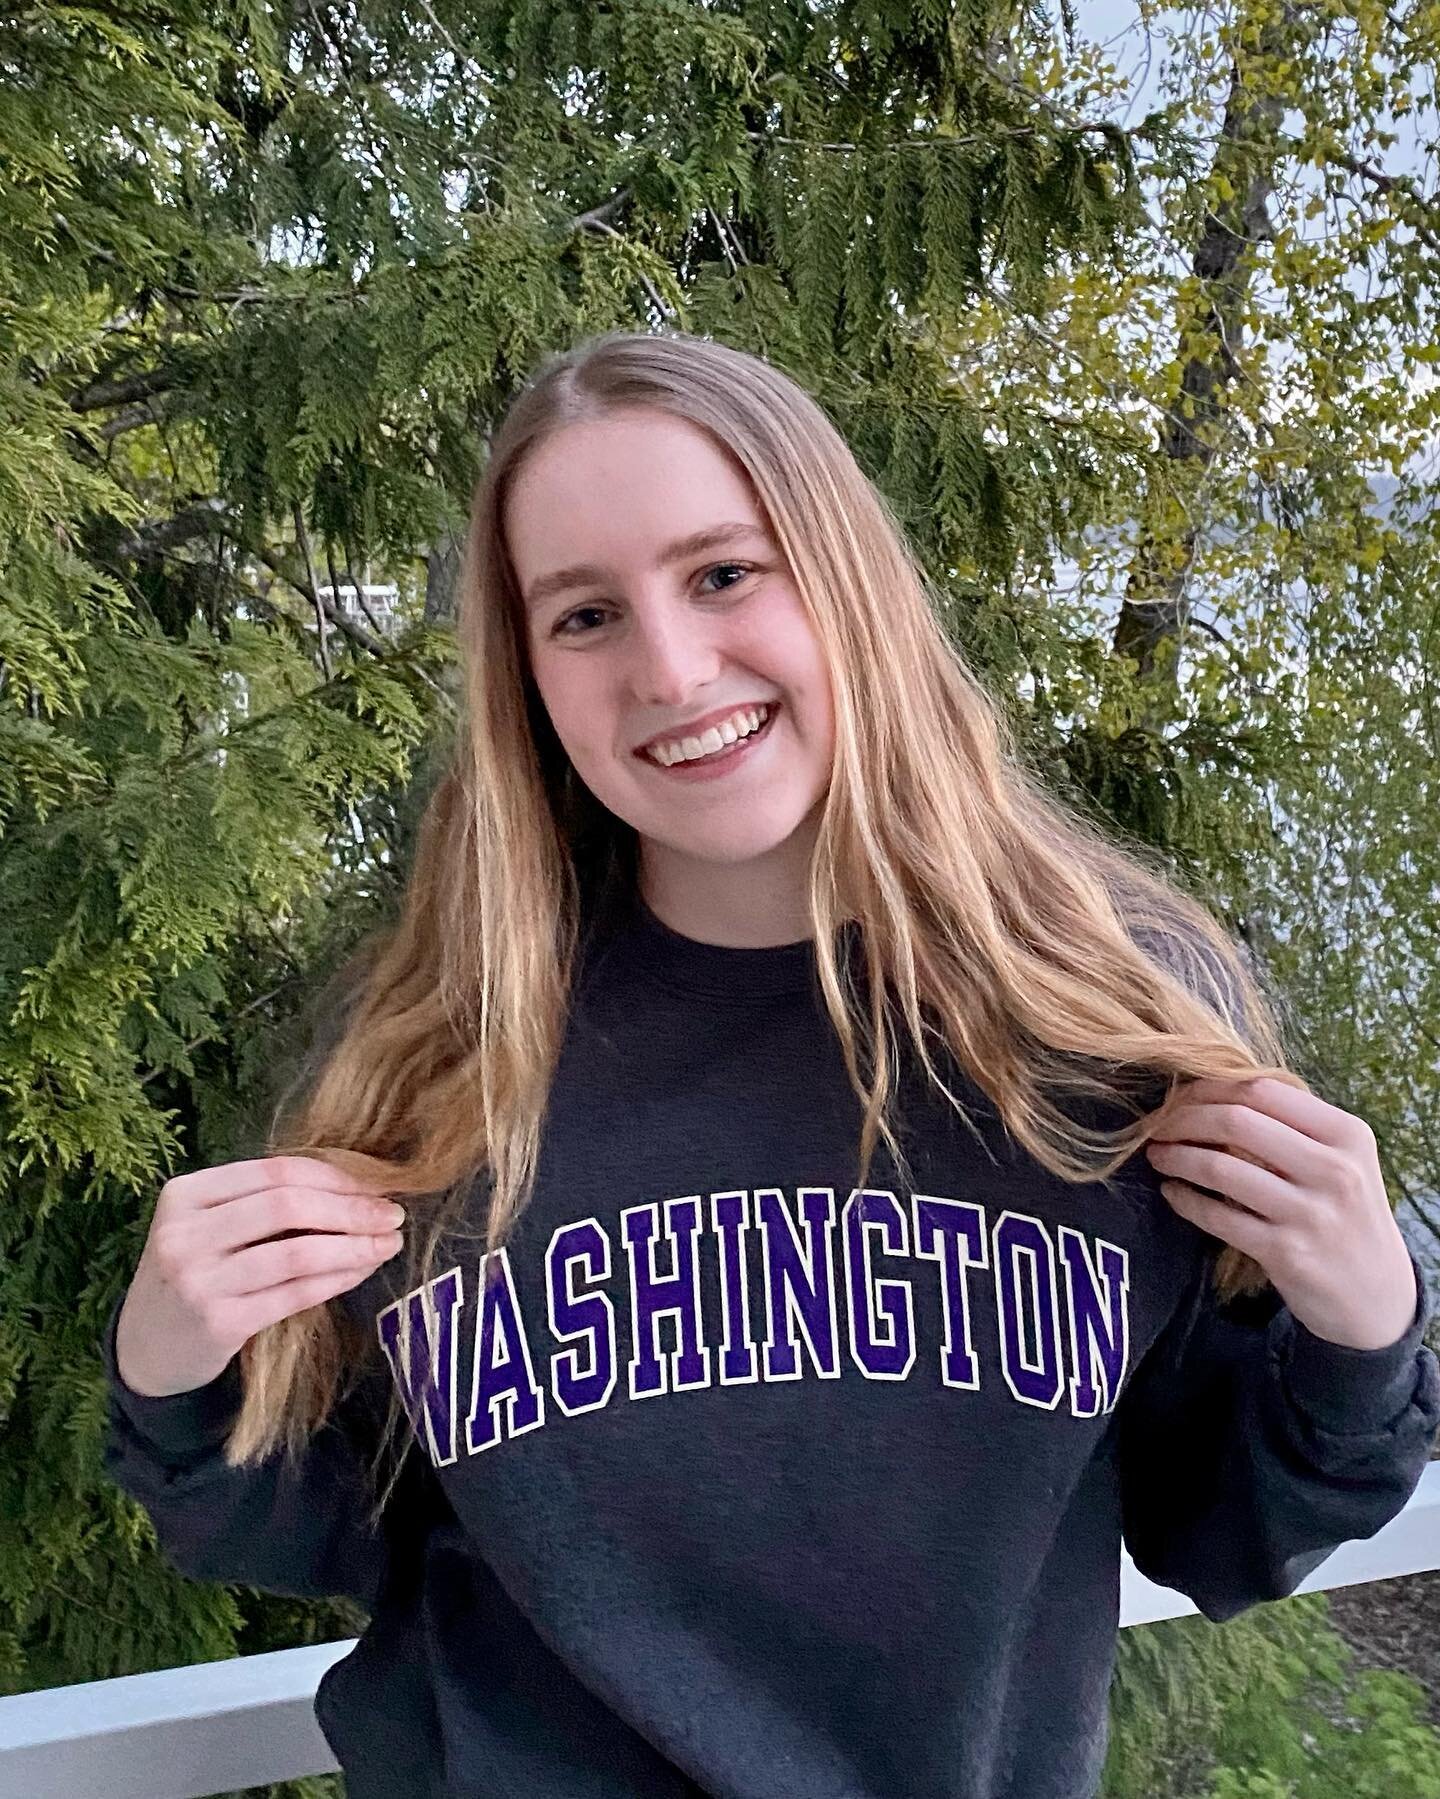 Congrats Roxanne on embarking on your first year at the University of Washington! Roxanne has done some incredible work in our community regarding mental health resources for family and teens and we hope to see her continue this amazing work and she 